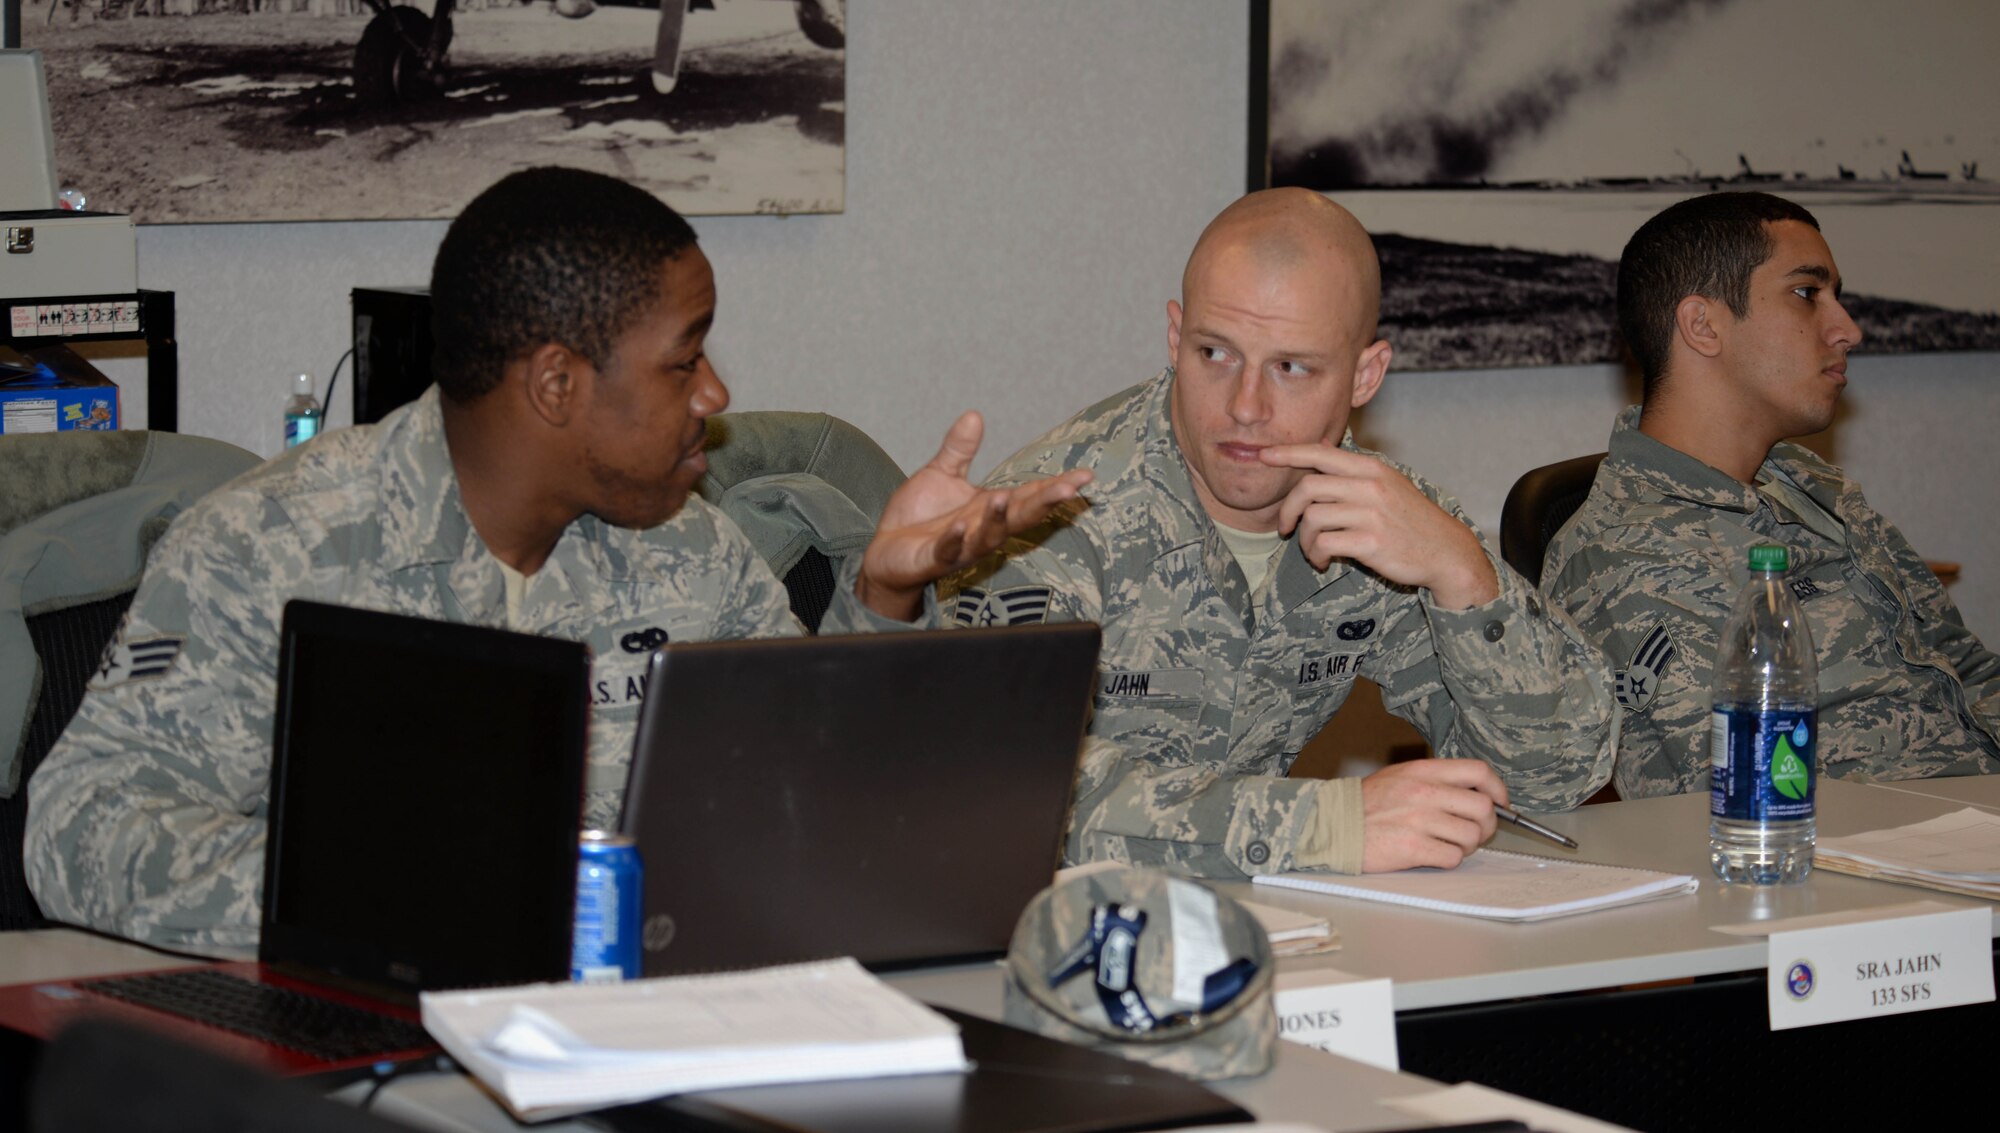 Airmen from Airman Leadership School Class 16-4 participate in a group discussion during class at Ellsworth Air Force Base, S.D., Feb. 25, 2016. ALS provides Airmen the opportunity to experience situations like emergent leadership issues and types of disciplinary problems that may arise. (U.S. Air Force photo by Airman 1st Class Denise M. Nevins/Released)